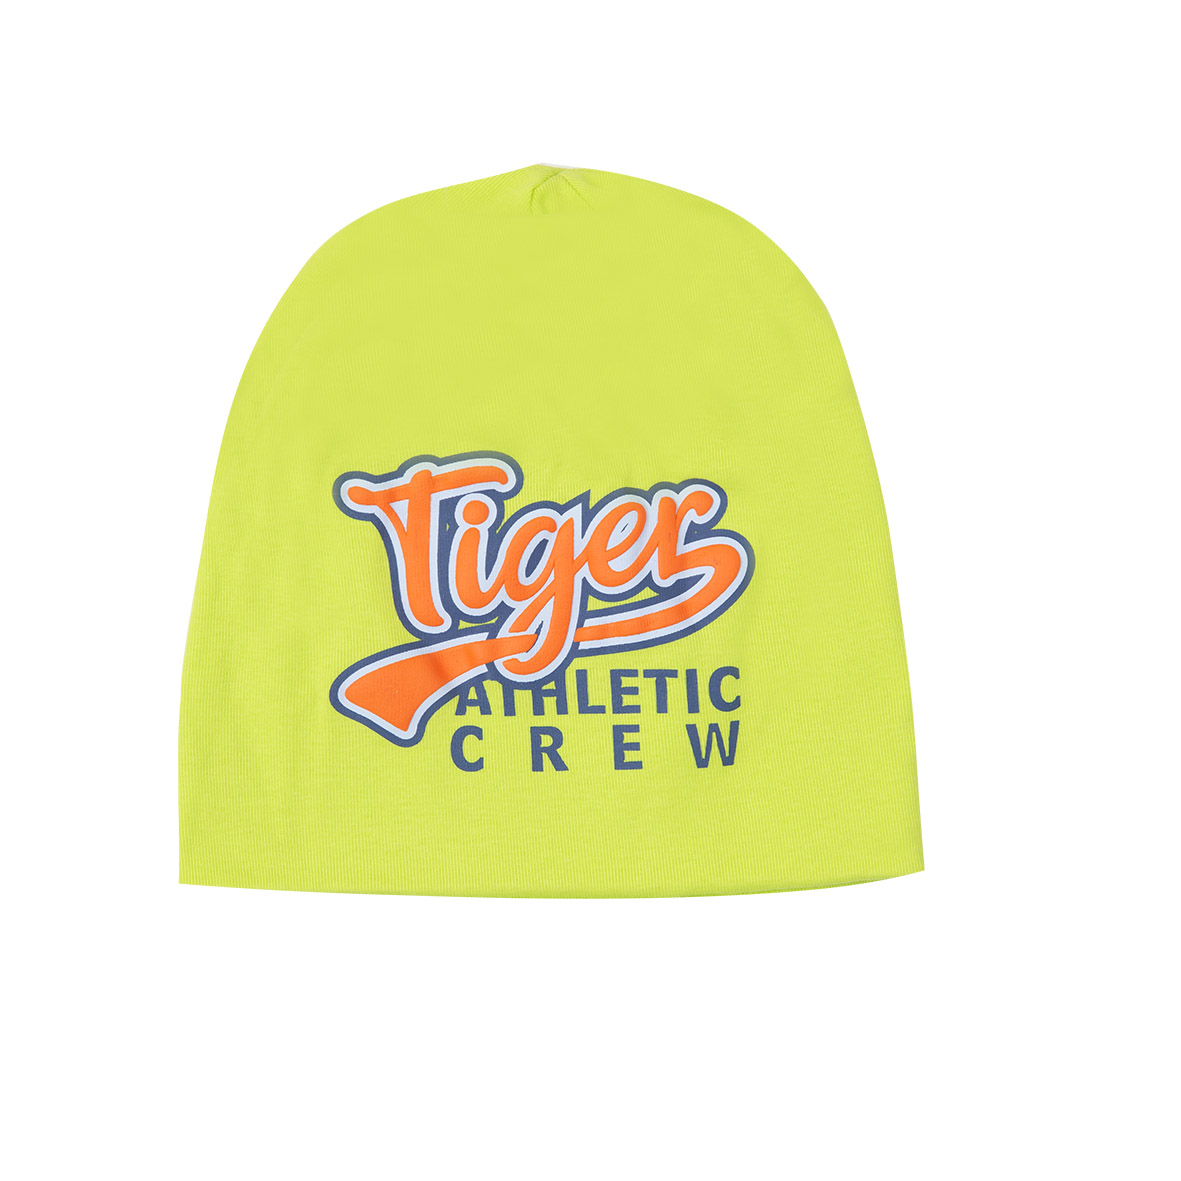 Mawi cappello stampa tiger - Mawi